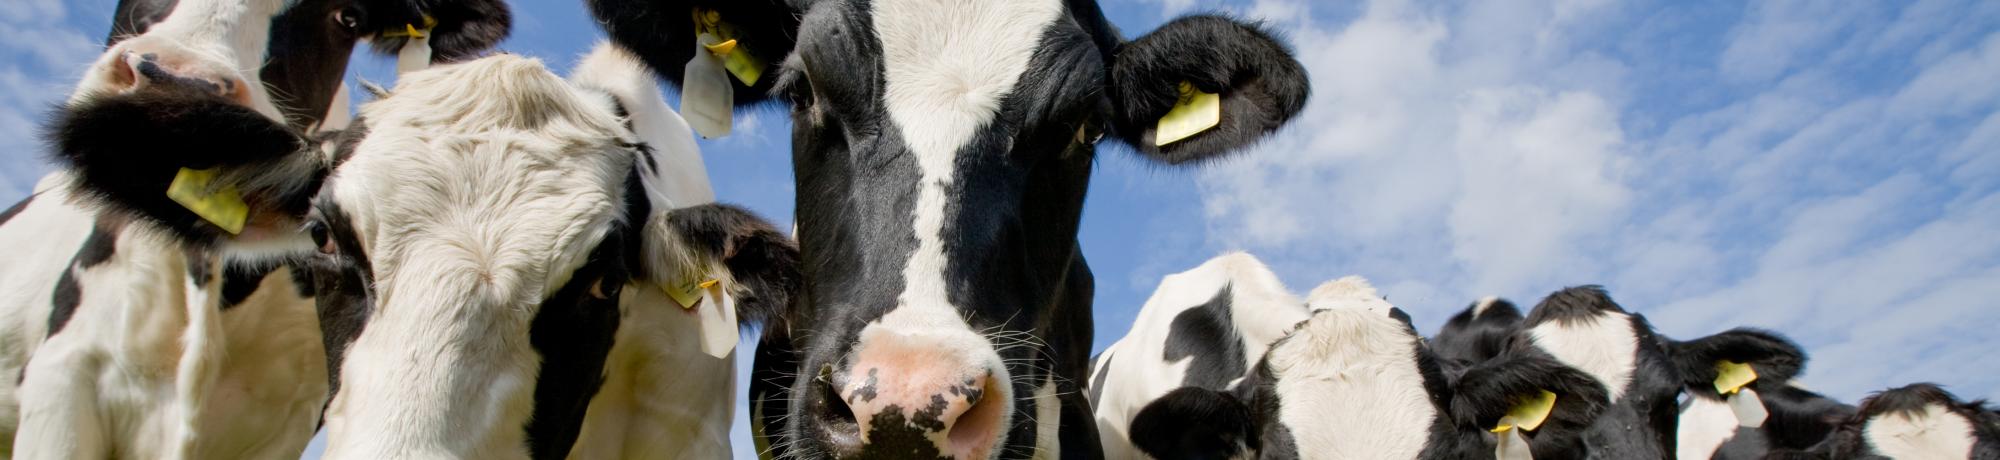 photos of cows staring straight into the camera